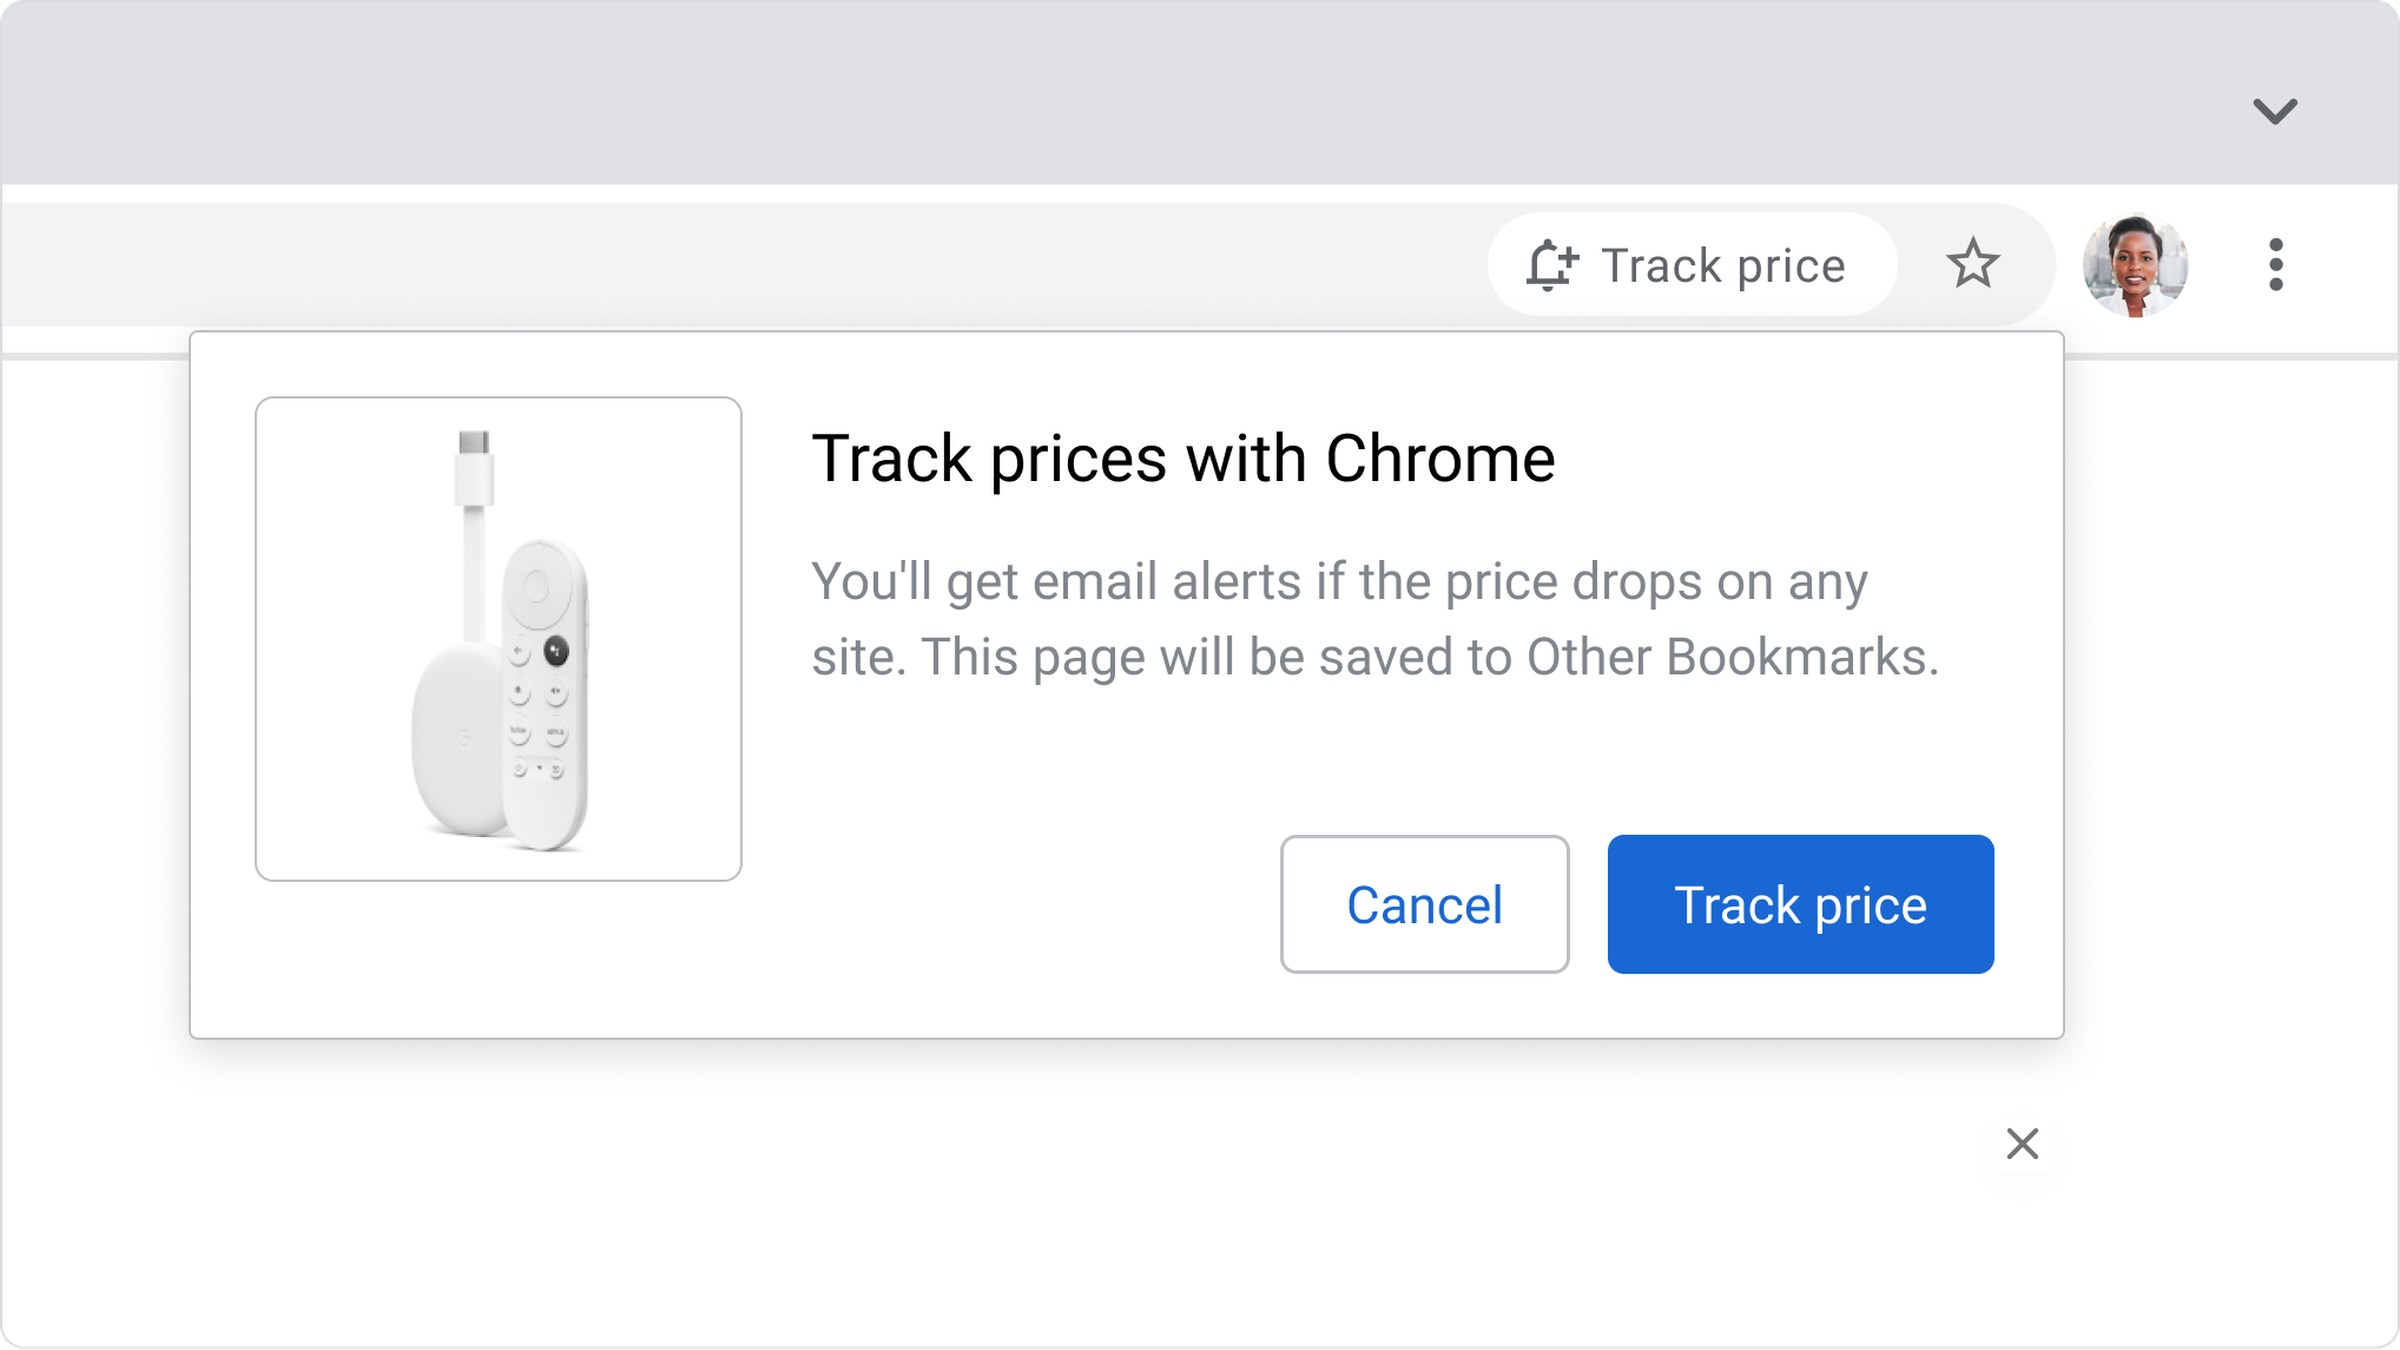 Screenshot of Google’s Track prices with Chrome feature, which shows a “track price” button.